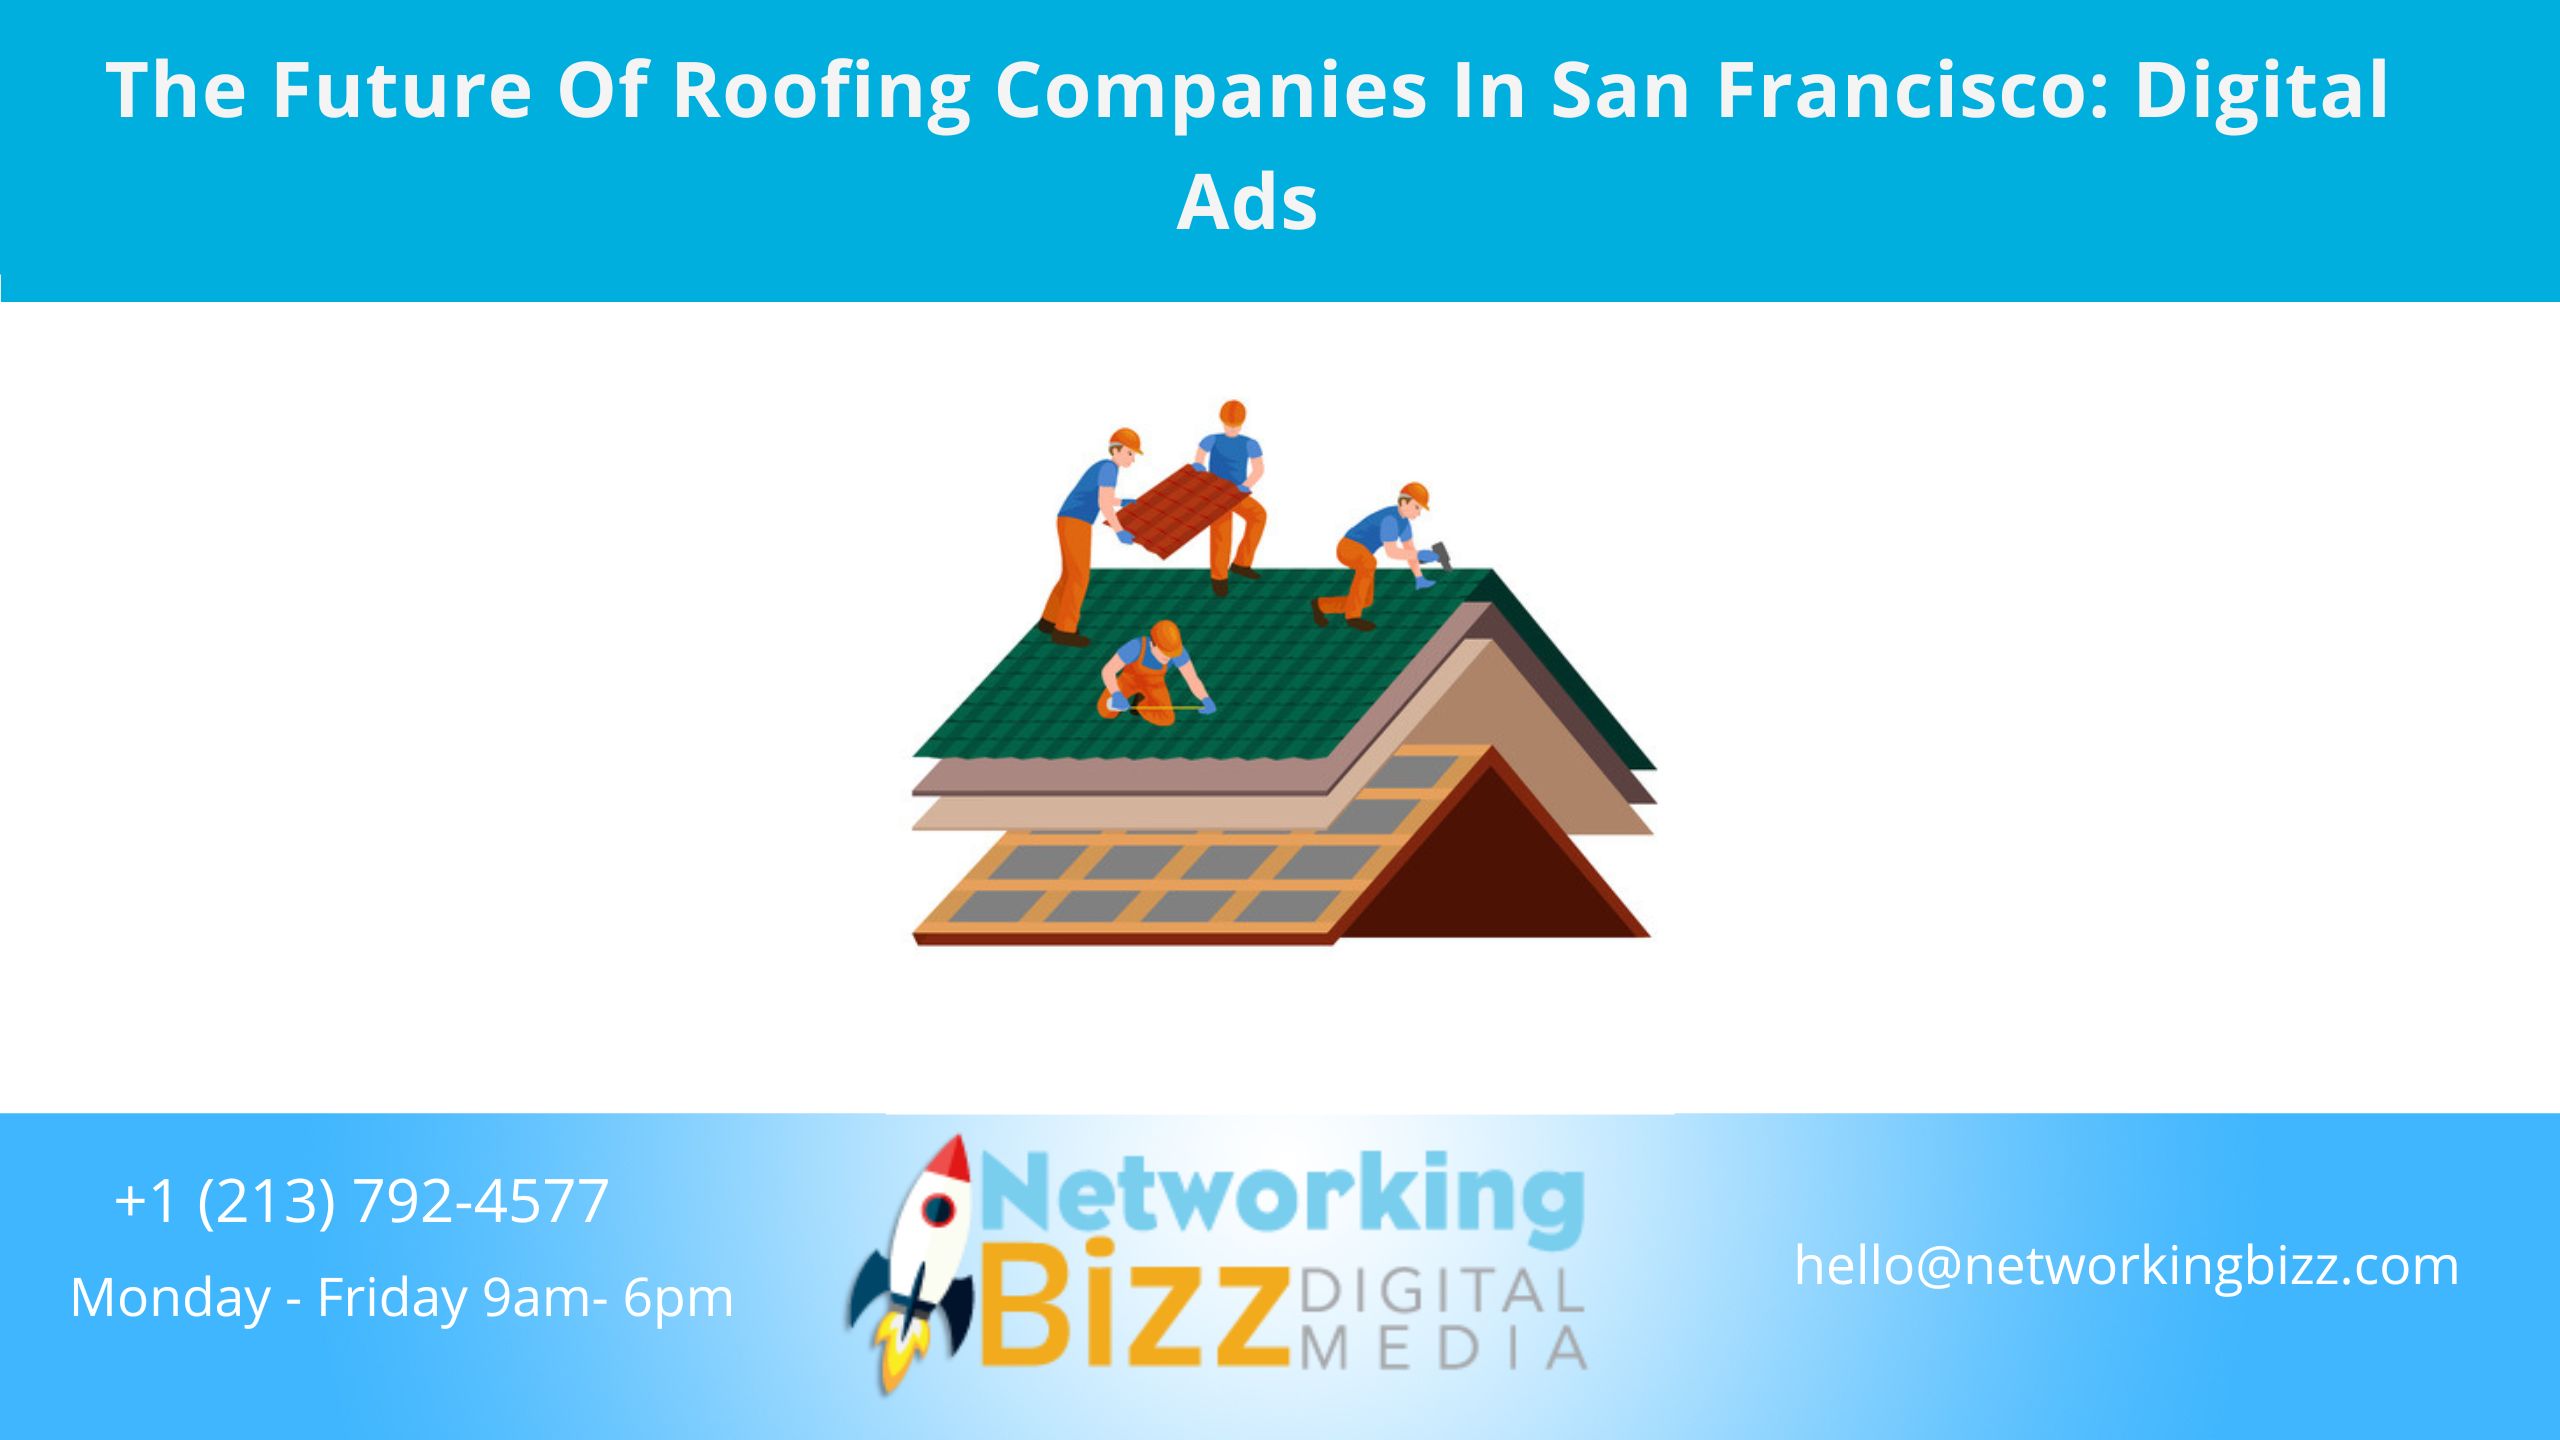 The Future Of Roofing Companies In San Francisco: Digital Ads